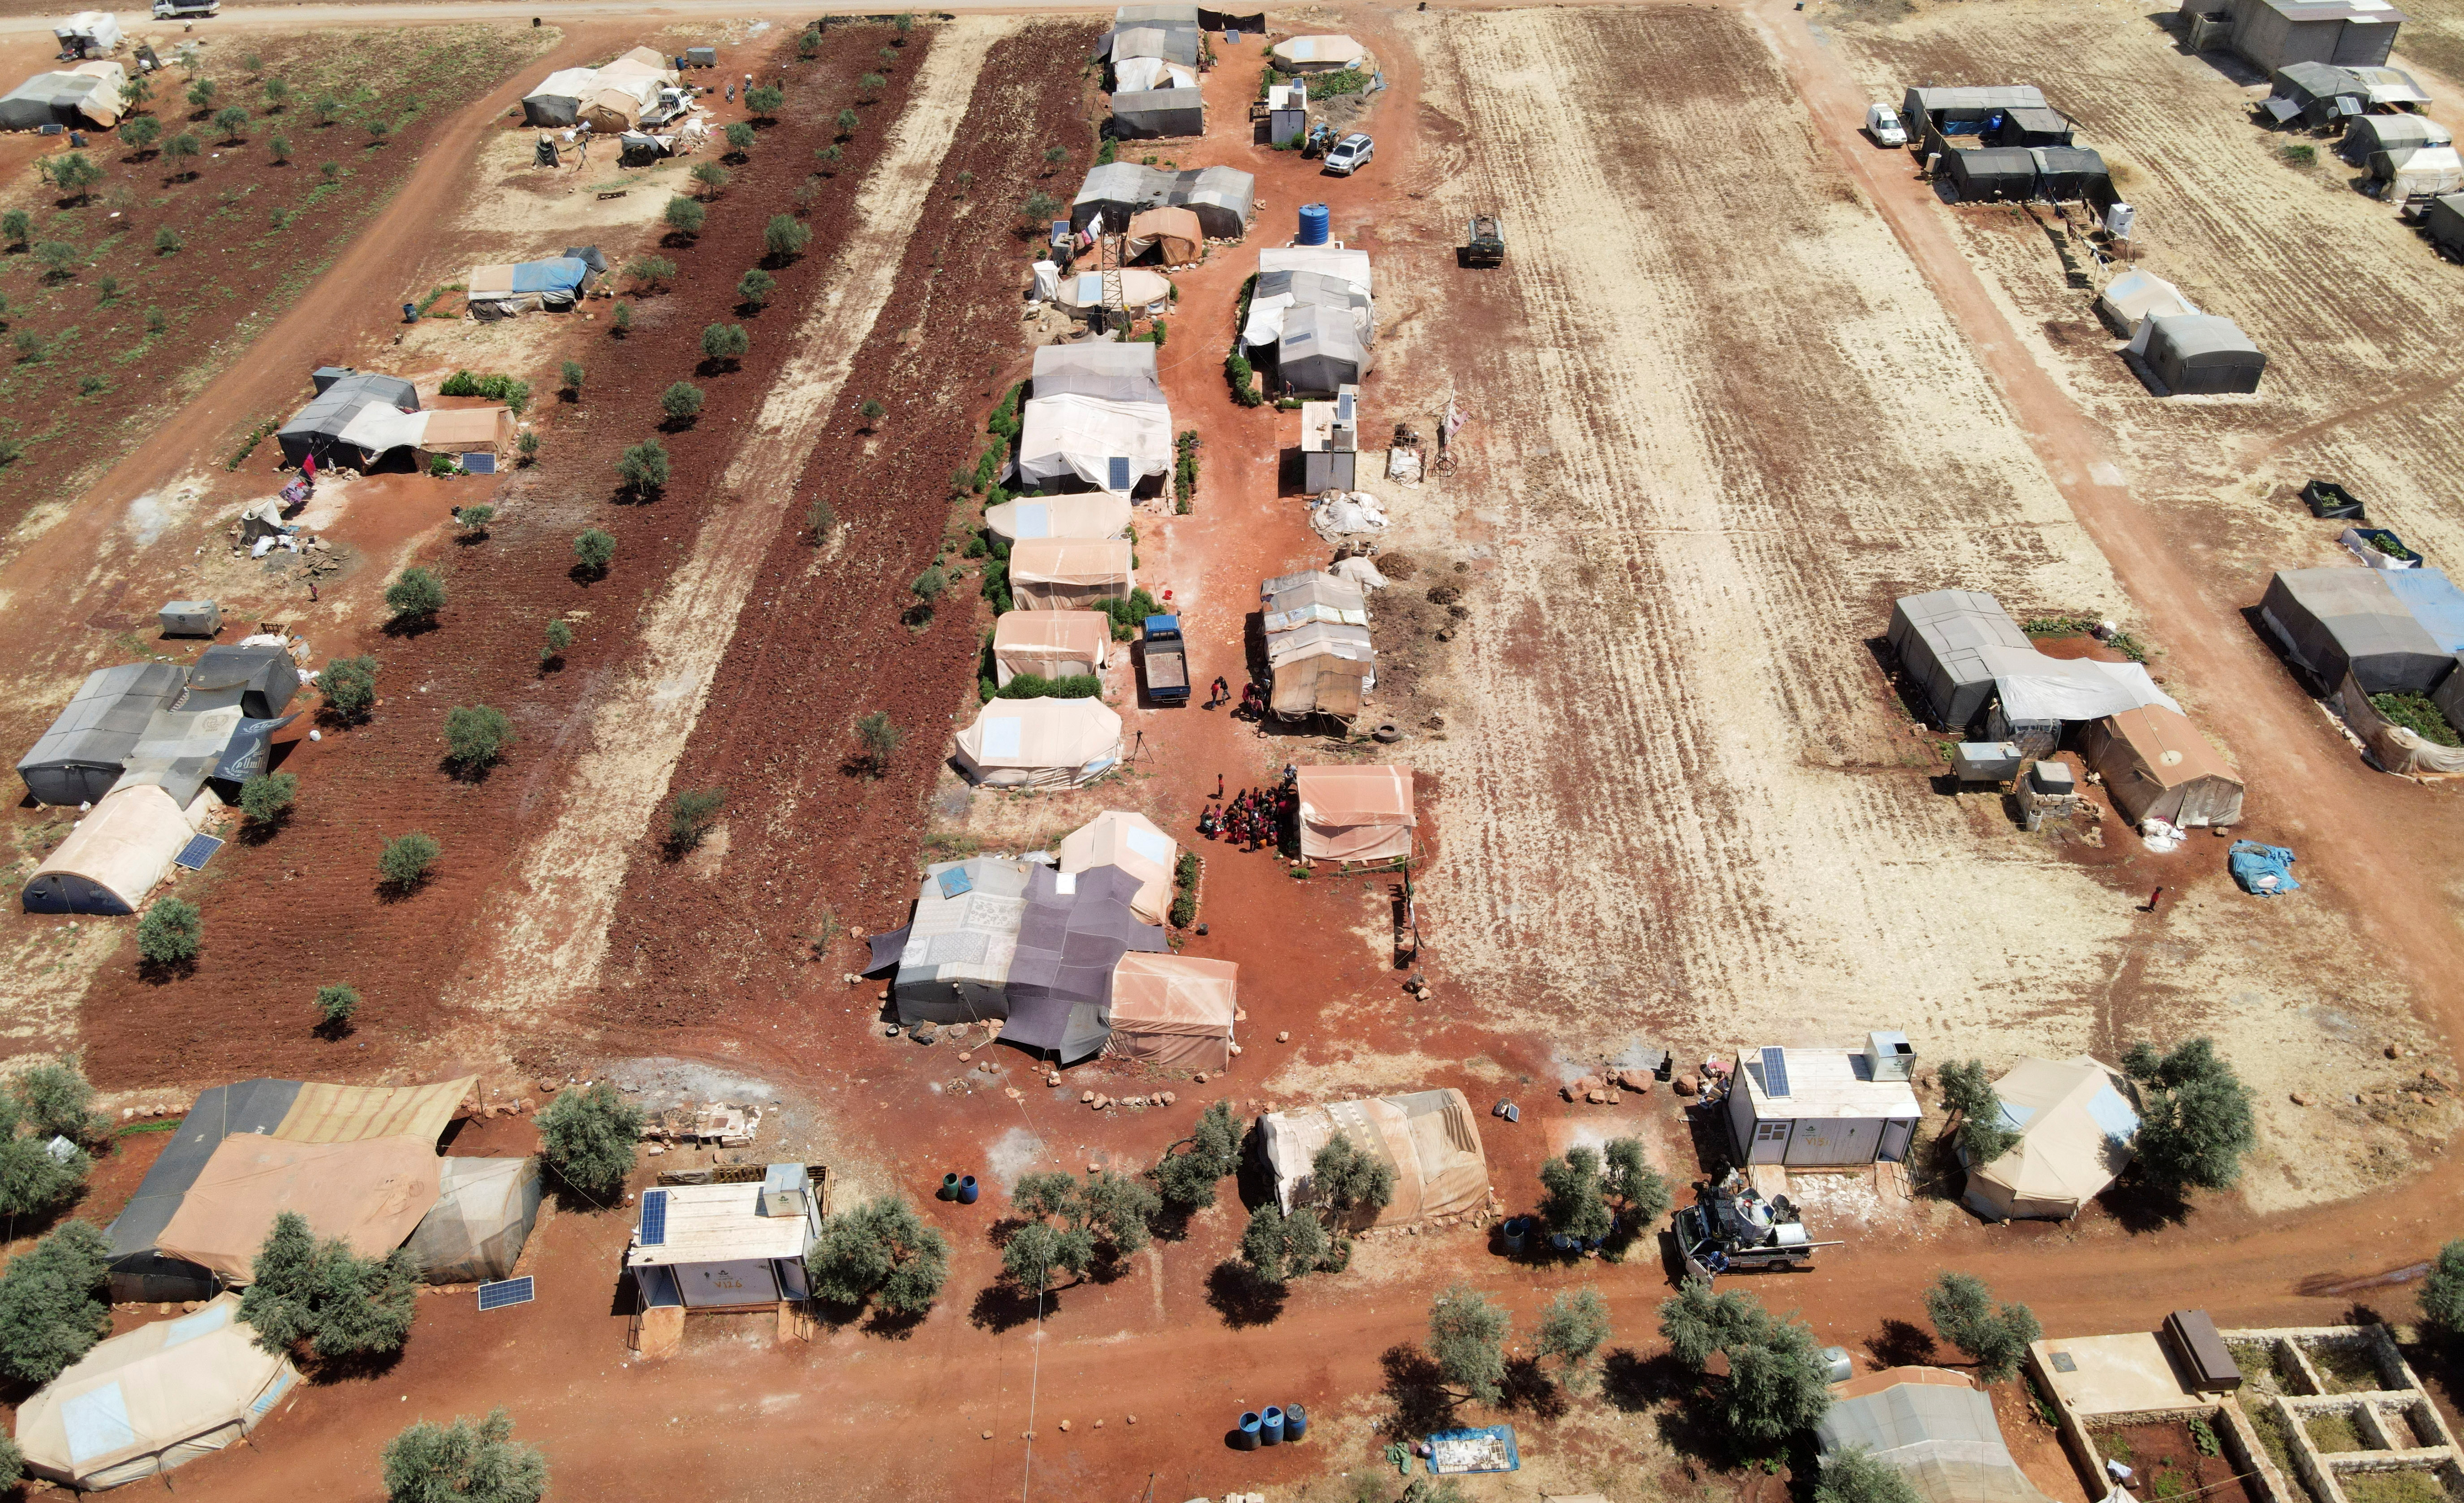 A view shows tents at a camp for internally displaced people in northern Idlib